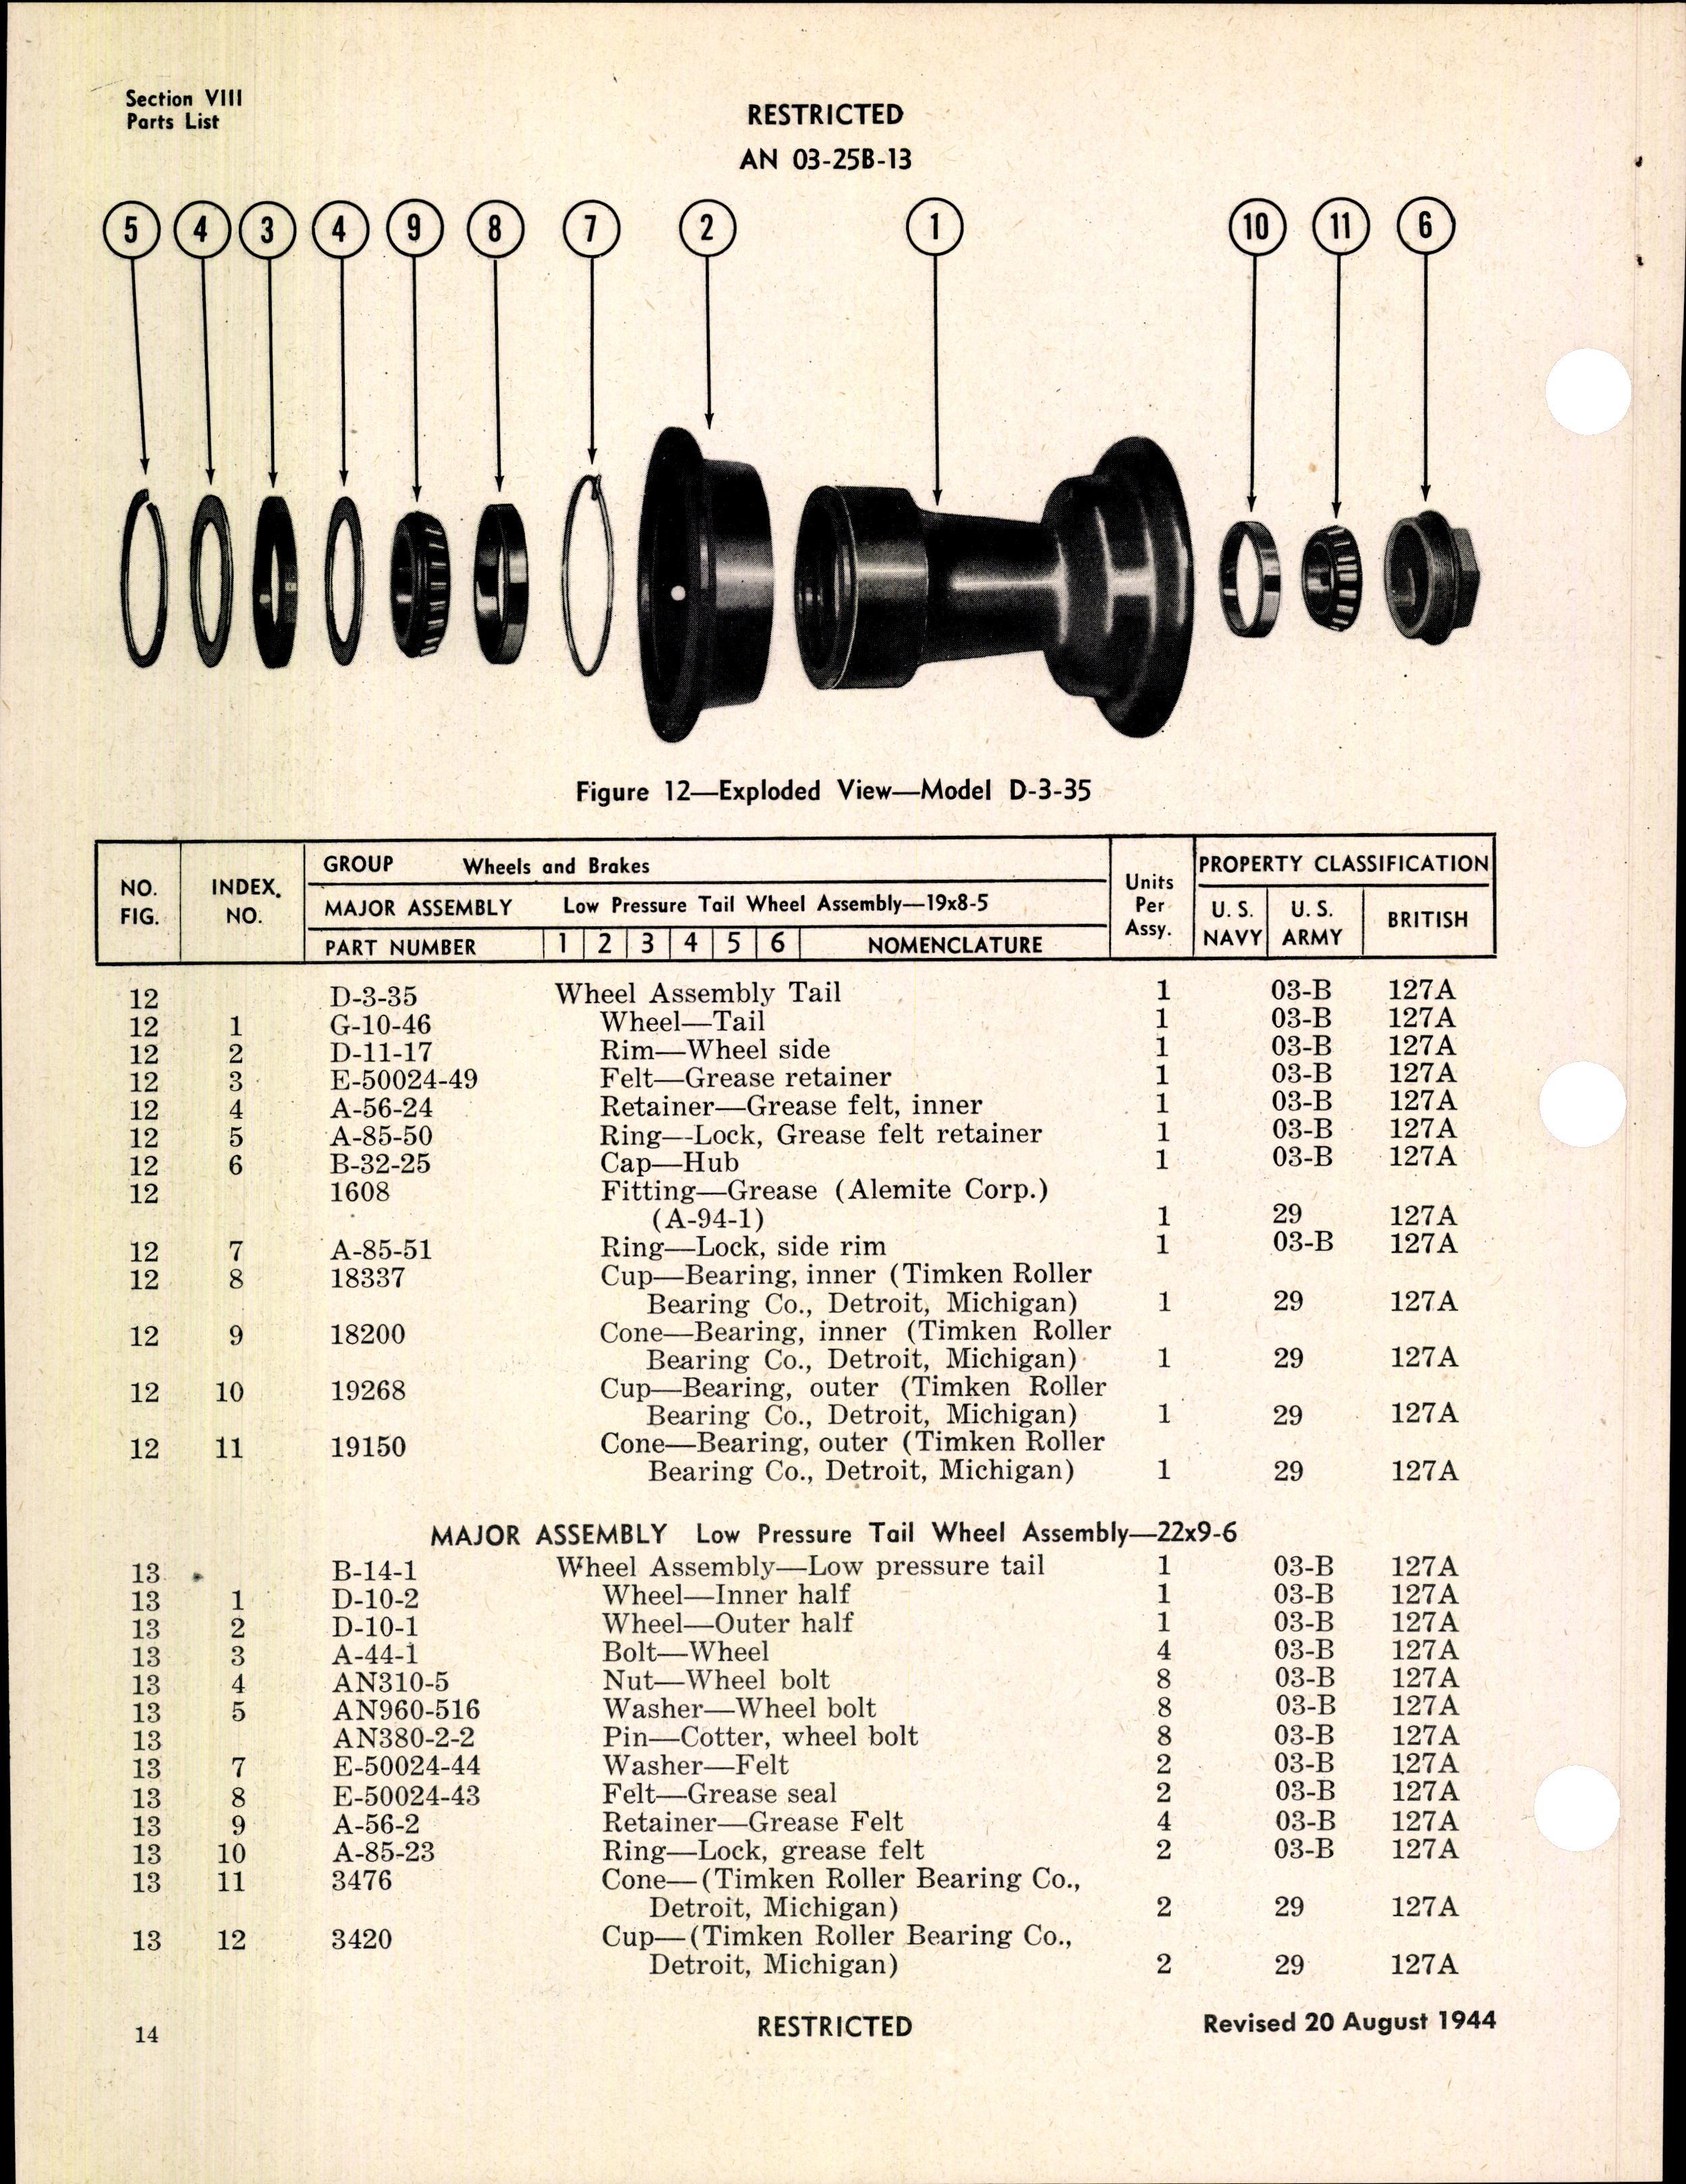 Sample page 18 from AirCorps Library document: Handbook of Instructions with Parts Catalog for Low Pressure Tail Wheels